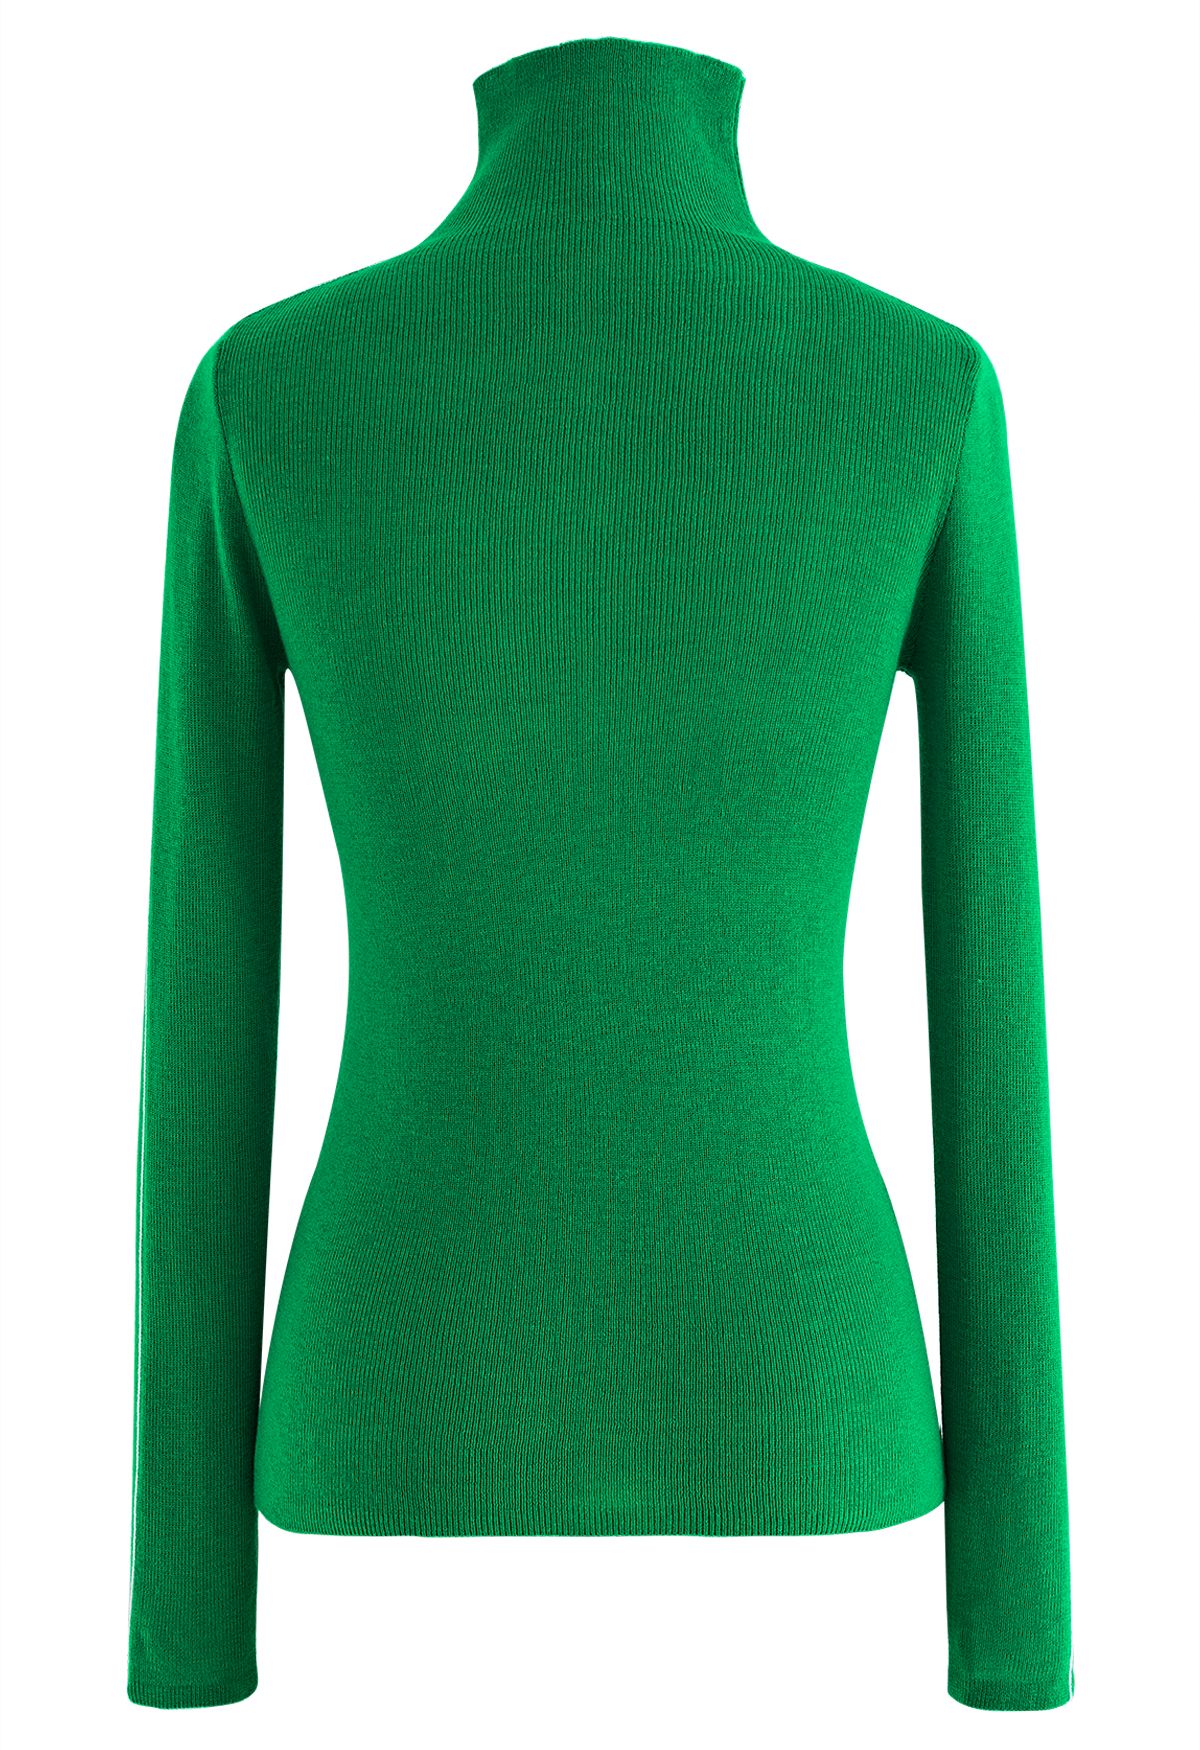 White Line High Neck Knit Top in Green